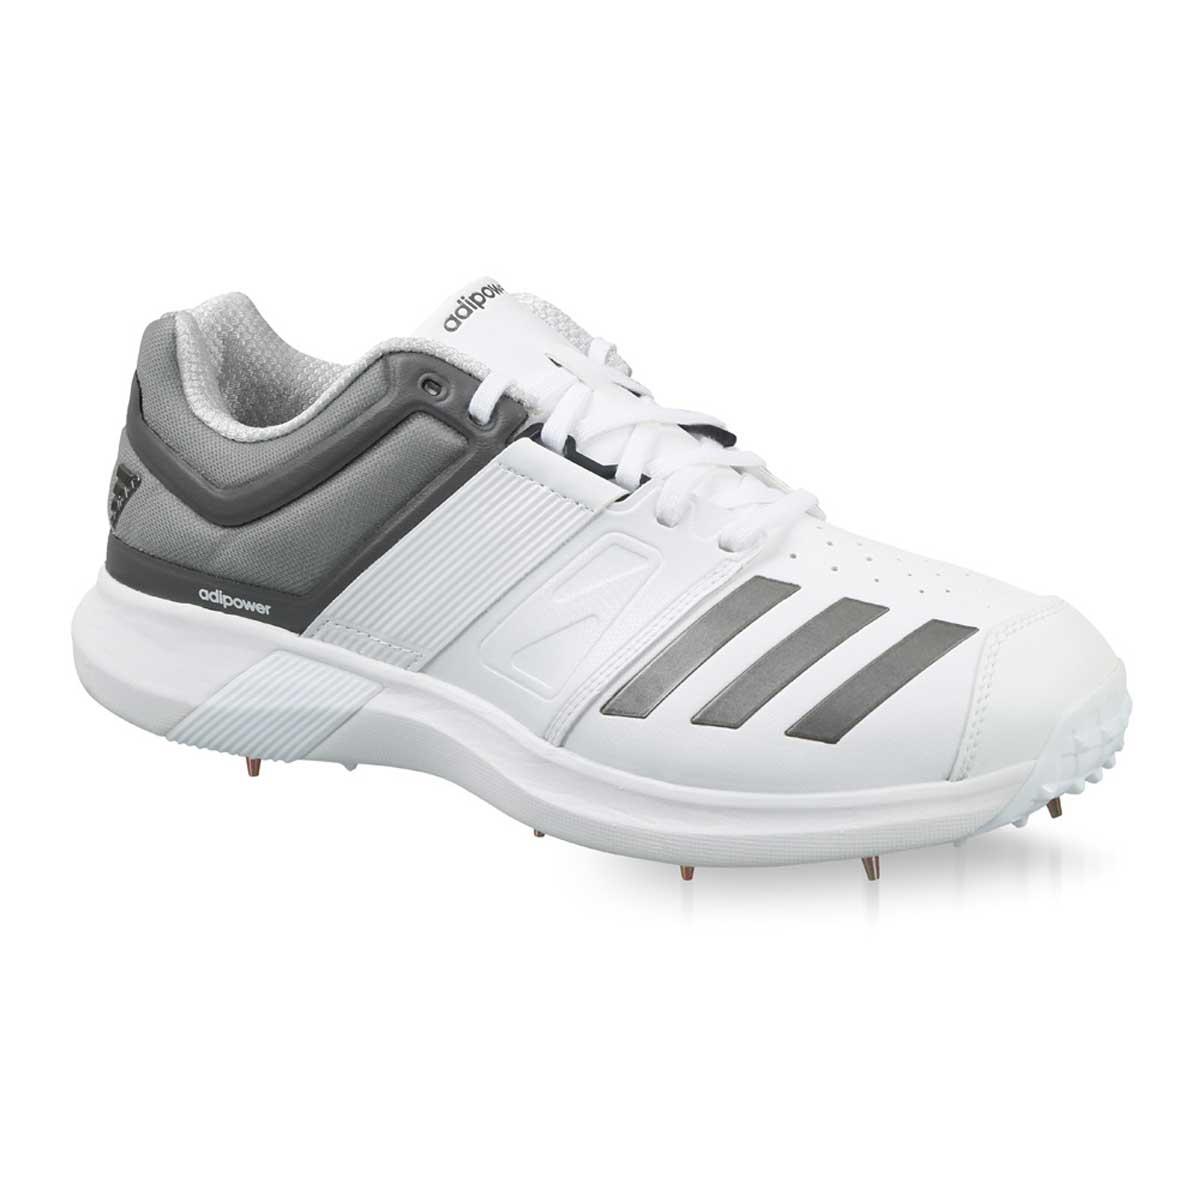 Buy Adidas Adipower Vector Cricket Shoes (White/Grey) Online at Lowest  Price in India